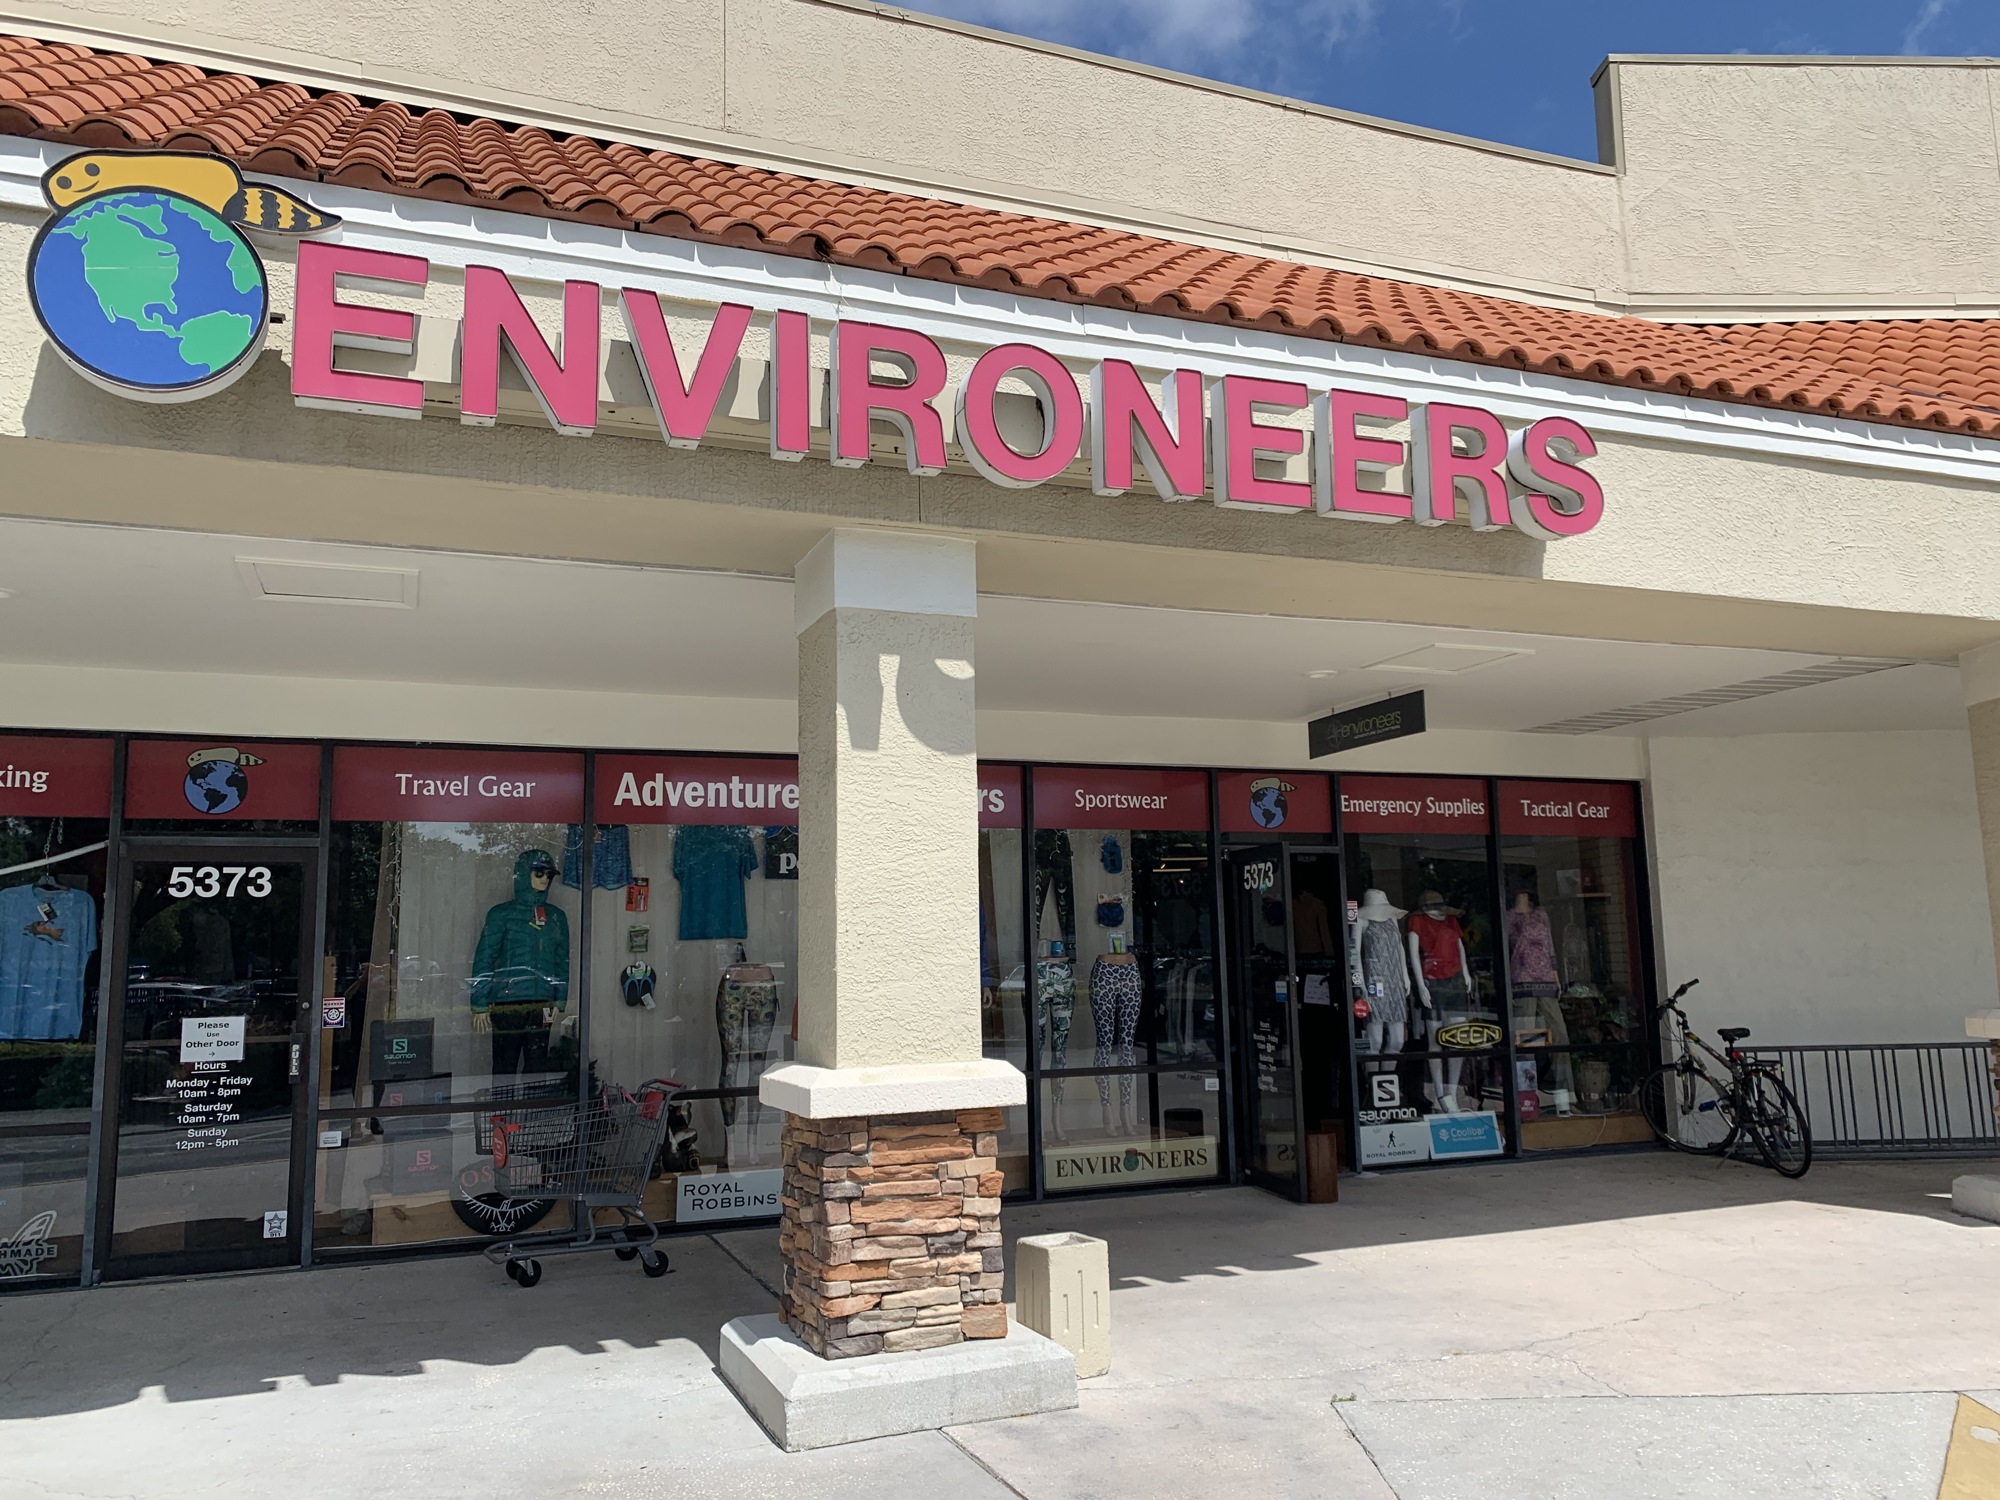 Courtesy. Brian Luther, a manager at Sarasota adventure outfitter Environeers, says items that have been selling include dehydrated food, stoves, fuel for the stoves, water filters and water purification tablets.